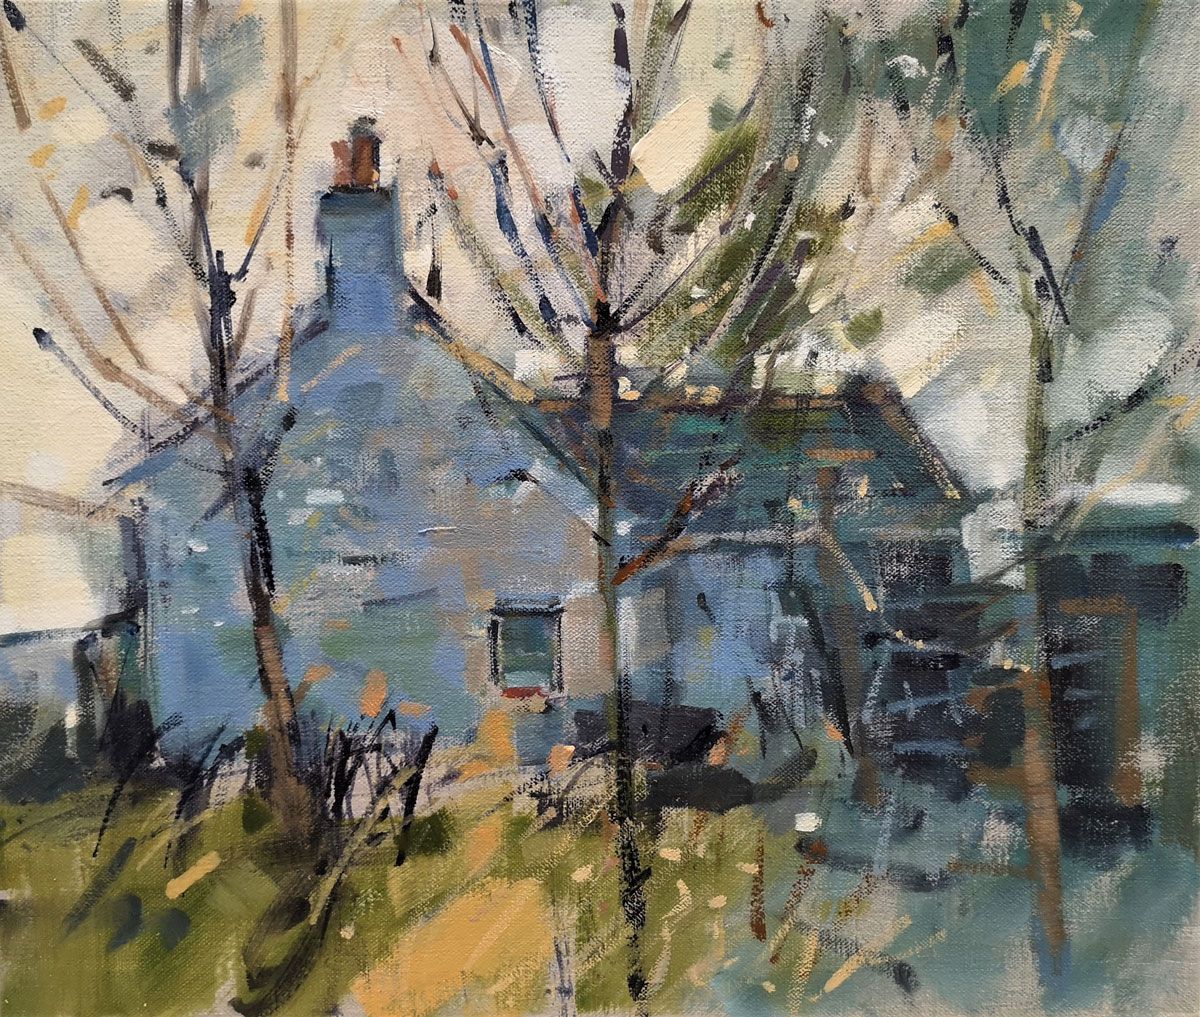 Cottage, Catterline by PETER FOYLE